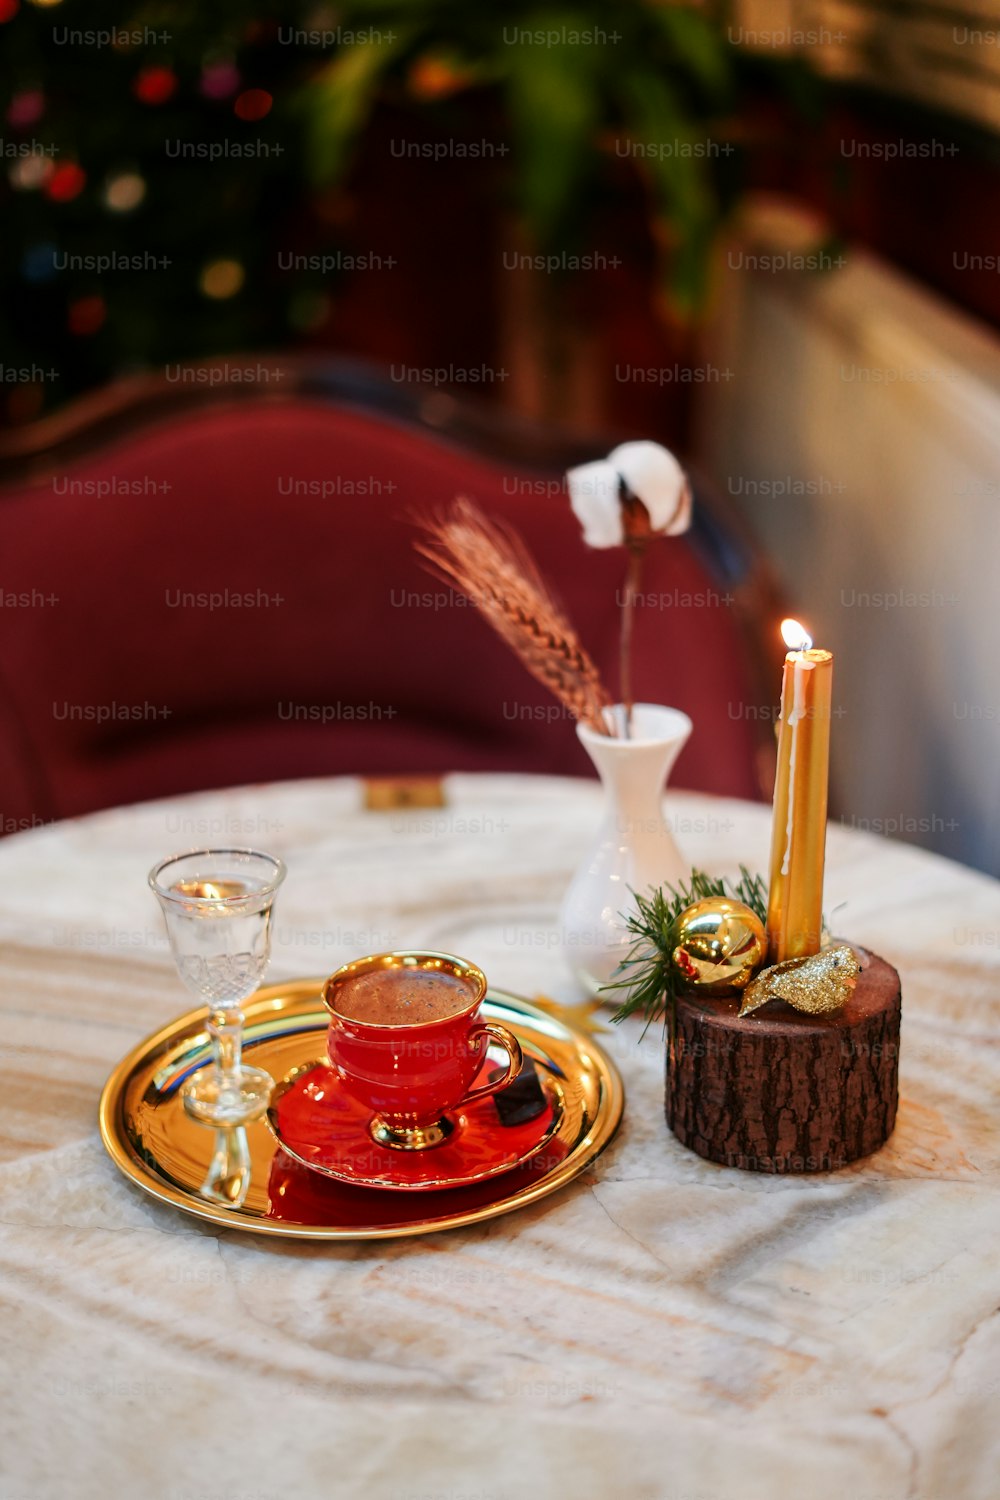 a table with a plate and a candle on it